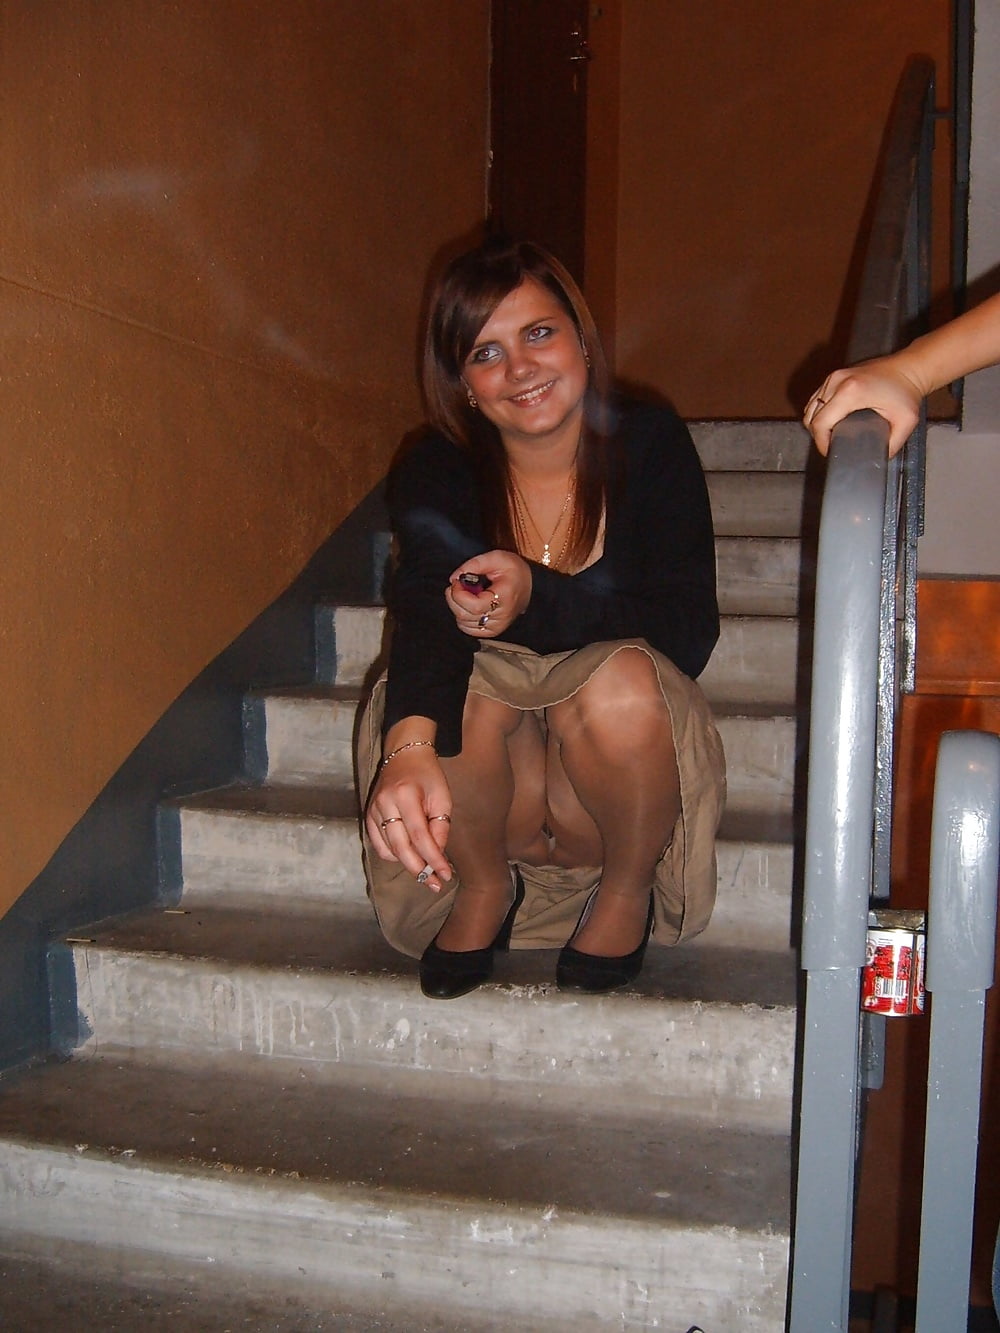 Accidental Pantyhose Upskirt - See and Save As ooops accidental pantyhose and tights ...